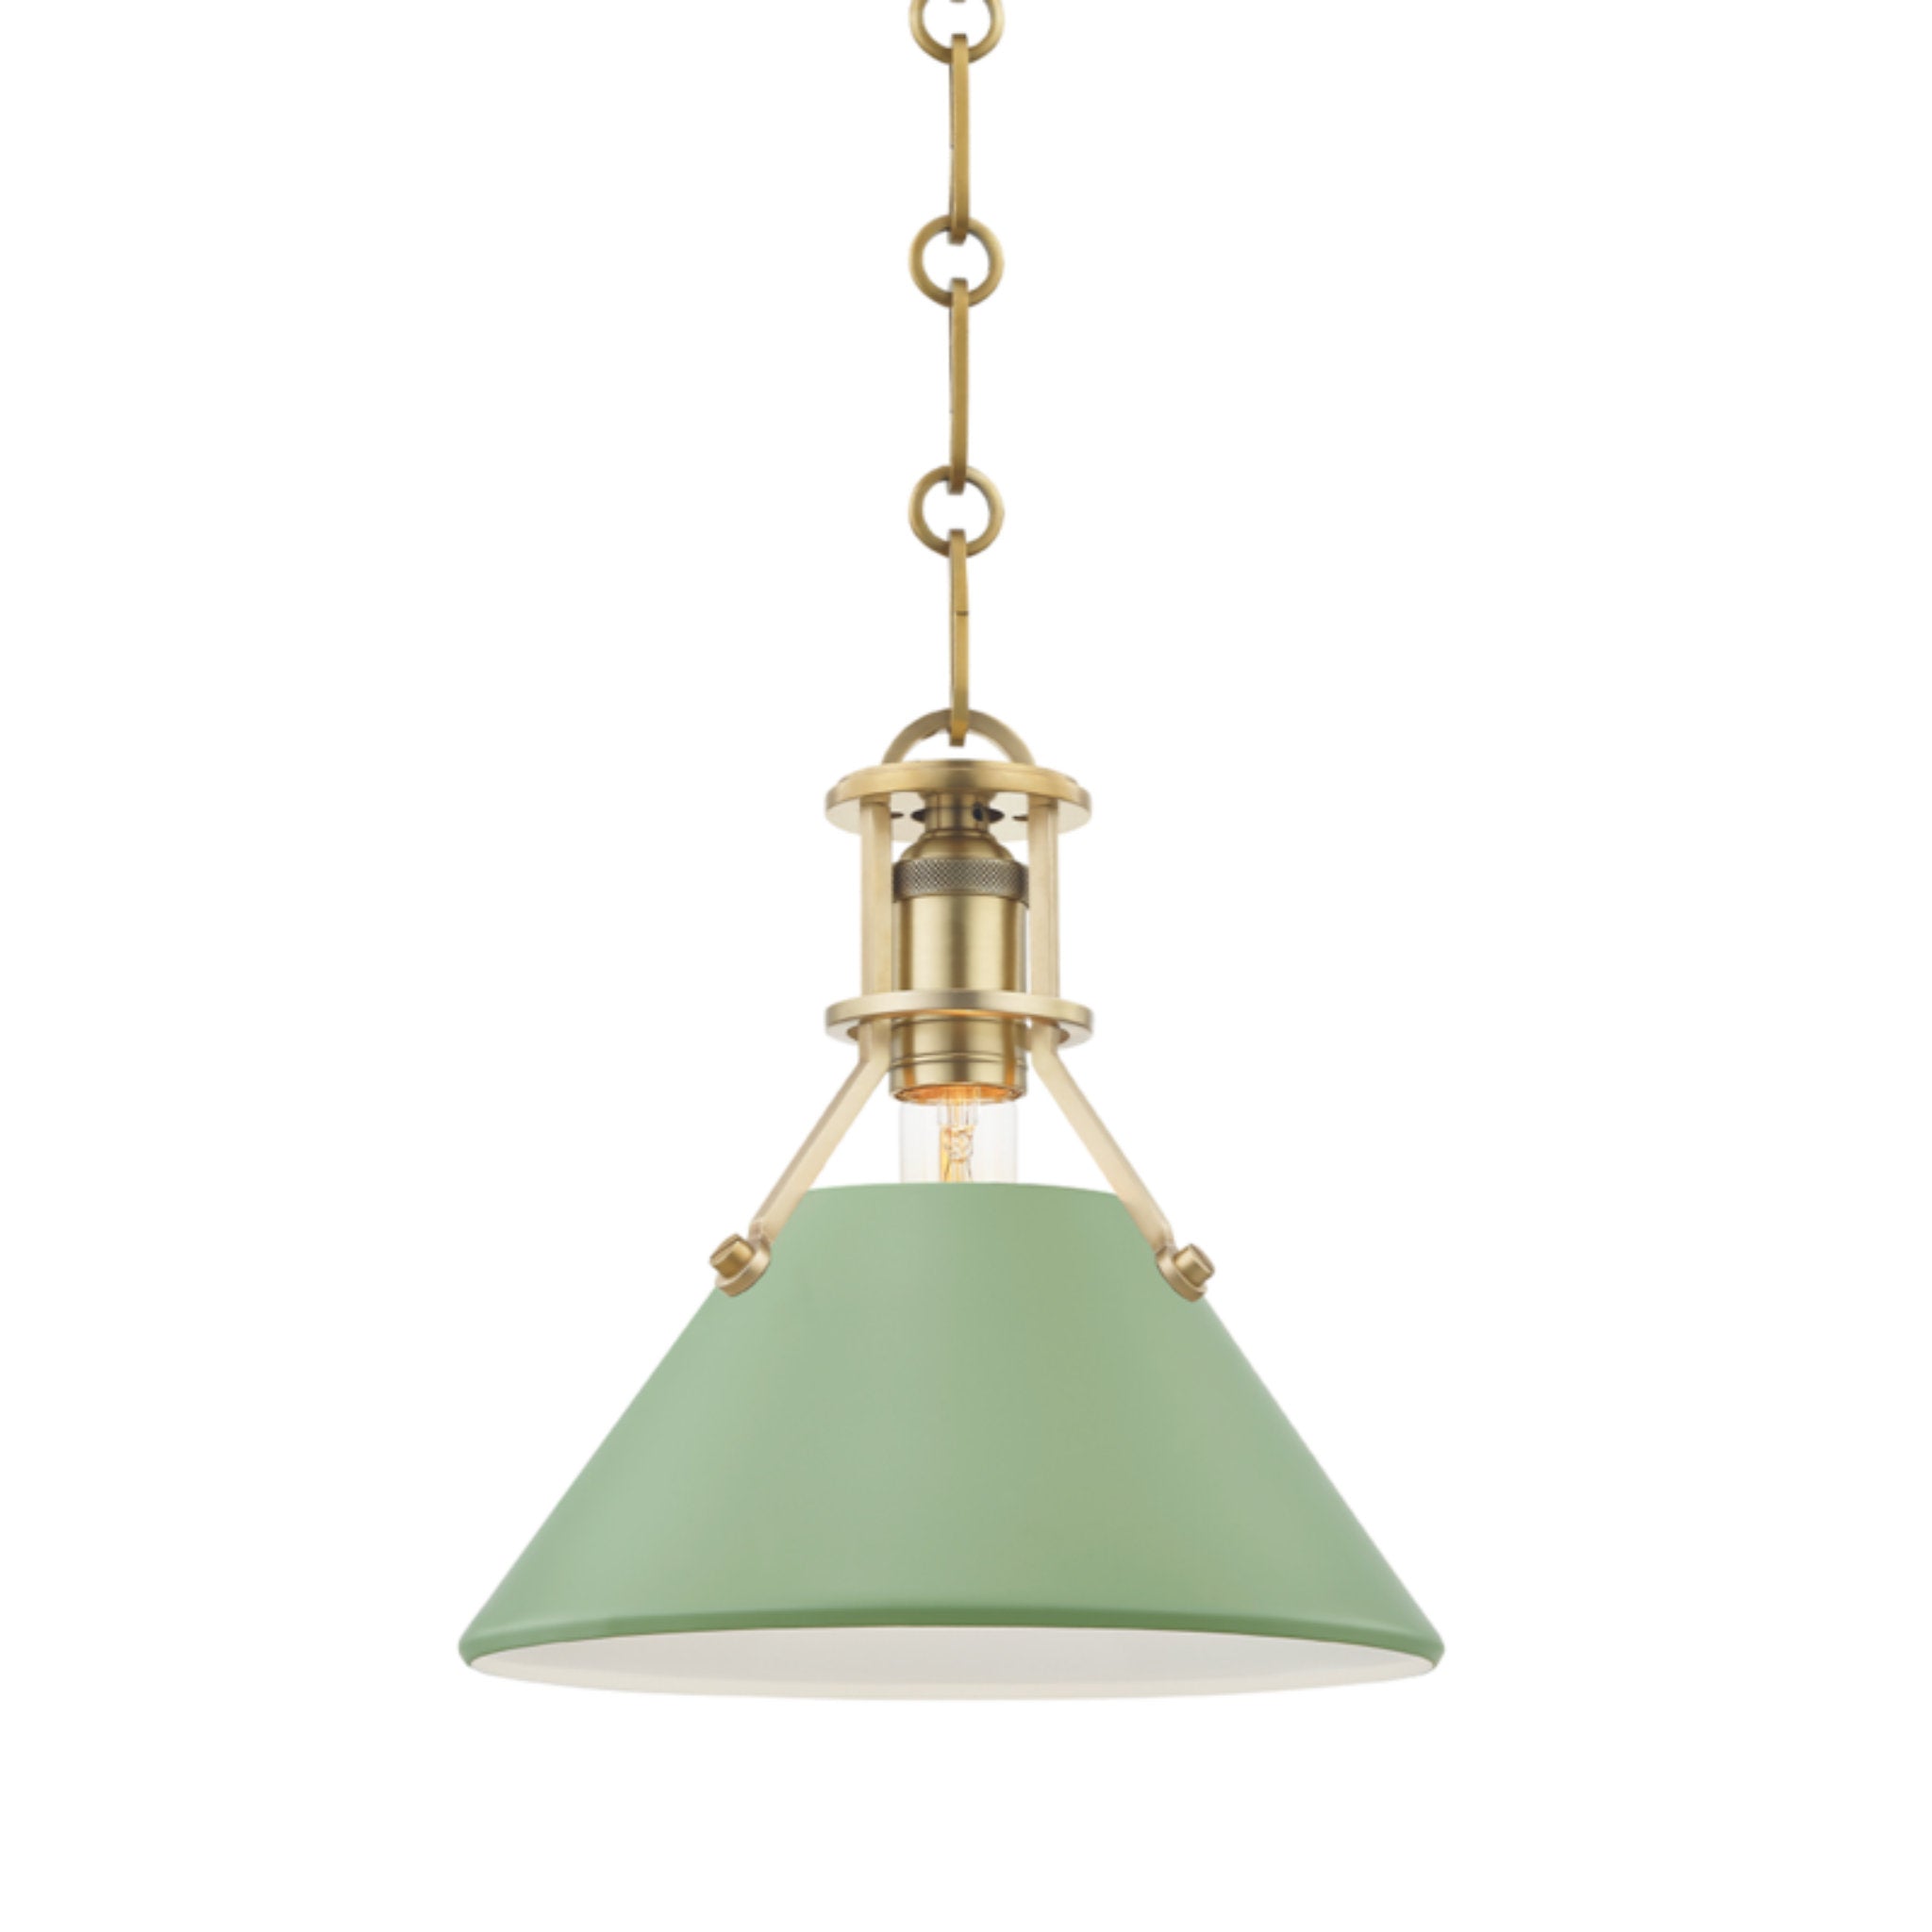 Painted No.2 1 Light Pendant in Aged Brass/leaf Green Combo by Mark D. Sikes